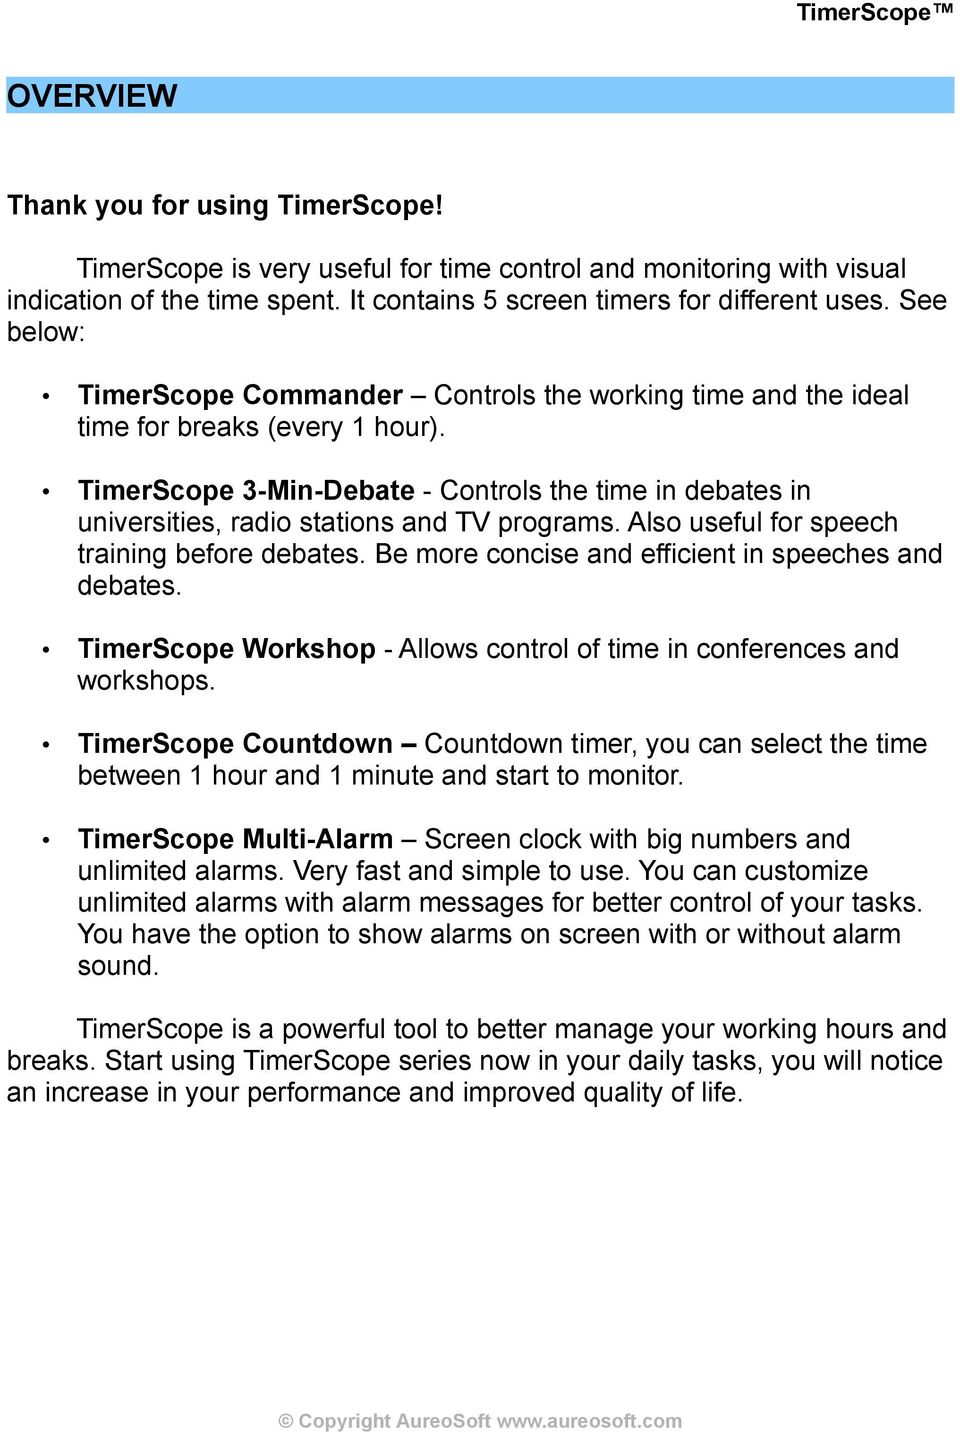 TimerScope 3-Min-Debate - Controls the time in debates in universities, radio stations and TV programs. Also useful for speech training before debates.